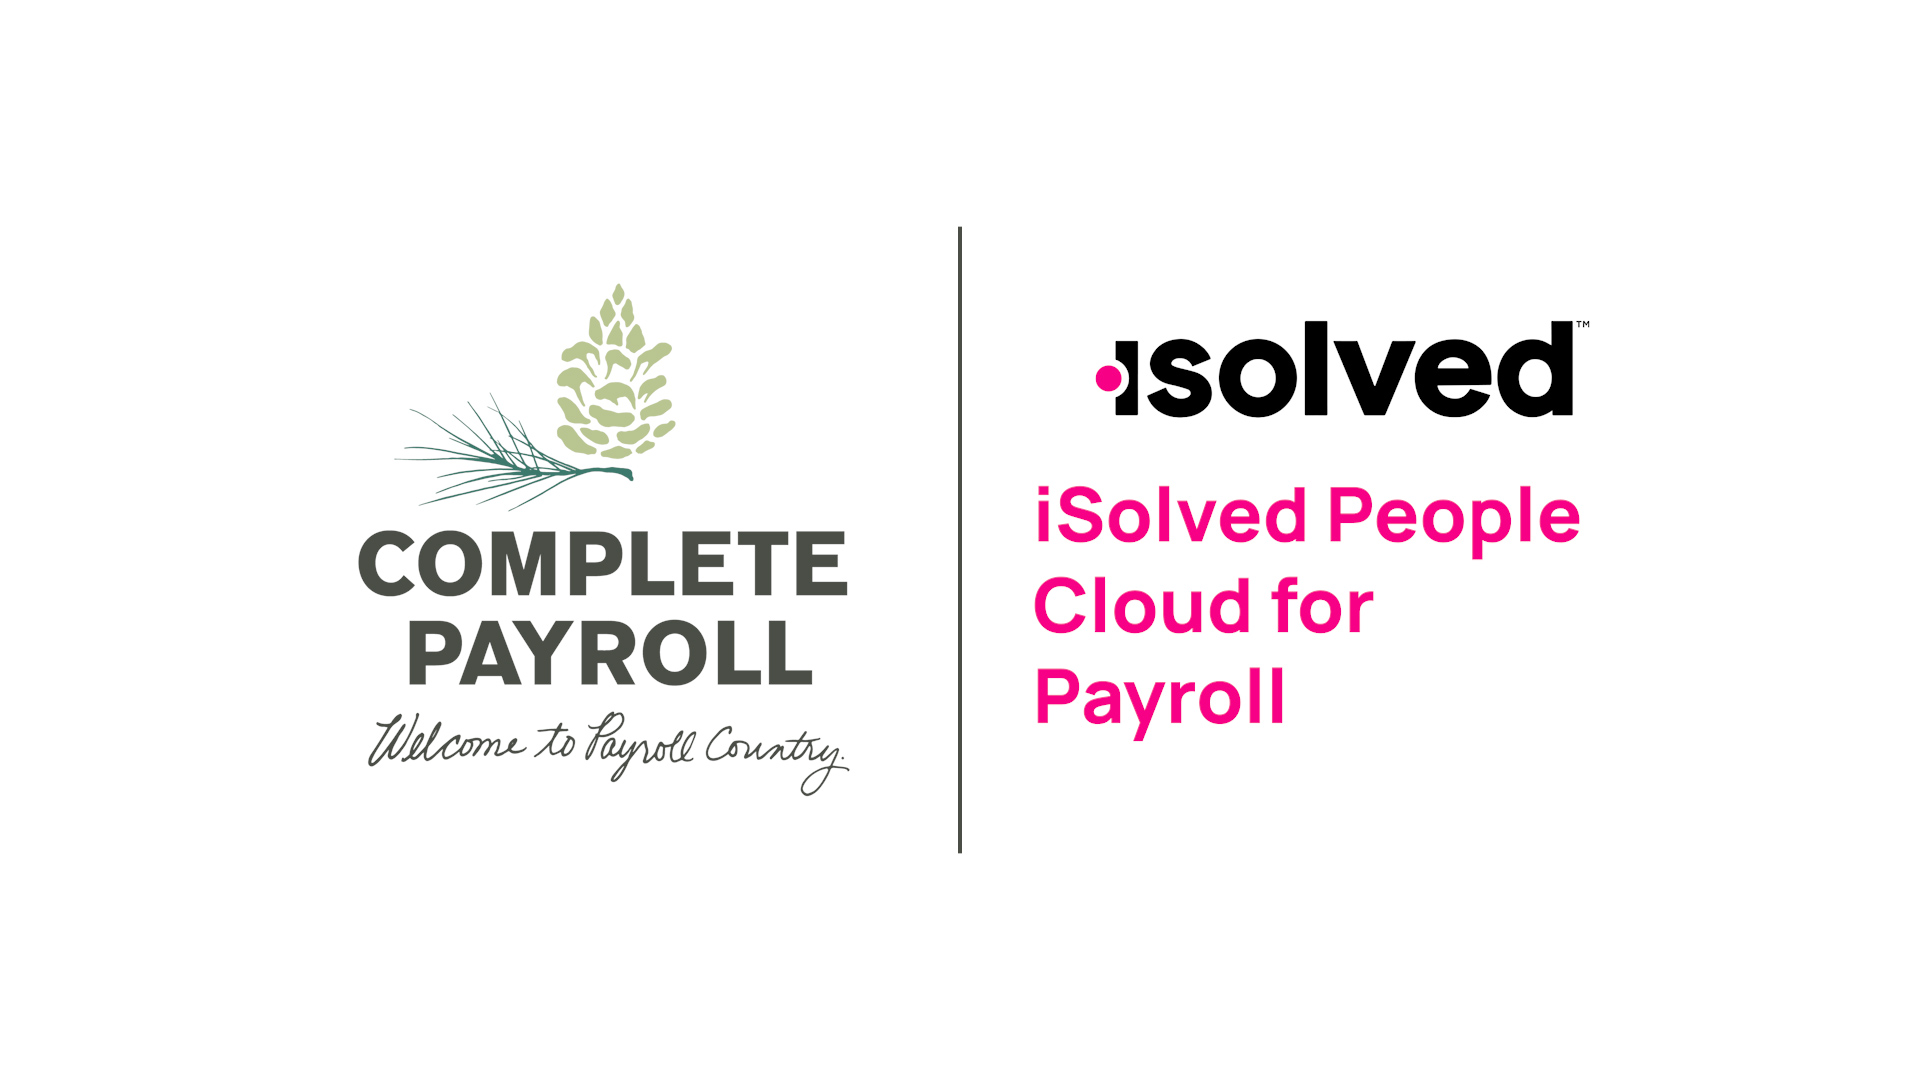 iSolved People Cloud for Payroll